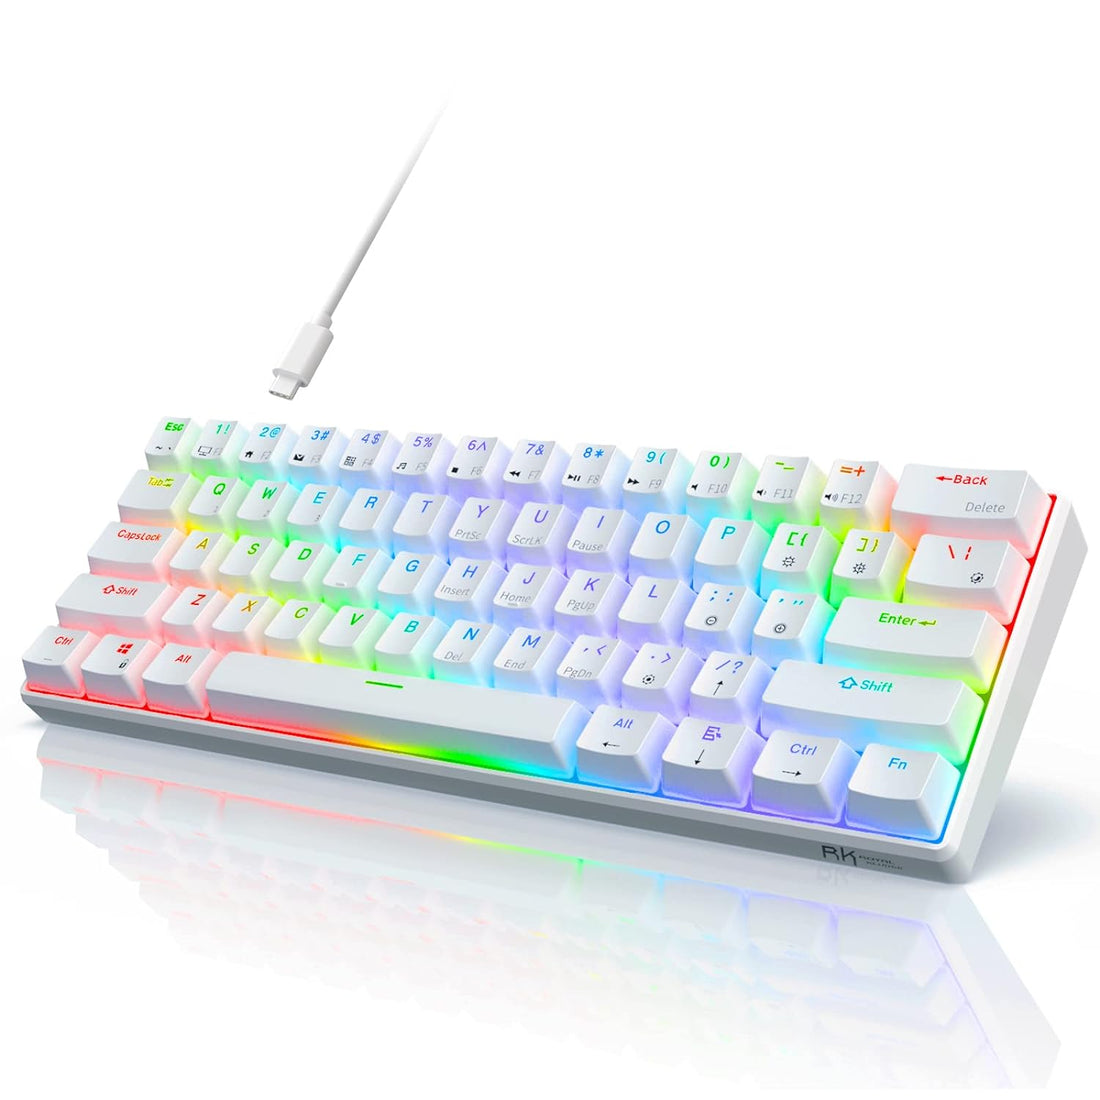 RK ROYAL KLUDGE RK61 Wired 60% Mechanical Gaming Keyboard RGB Backlit Ultra-Compact Blue Switch White